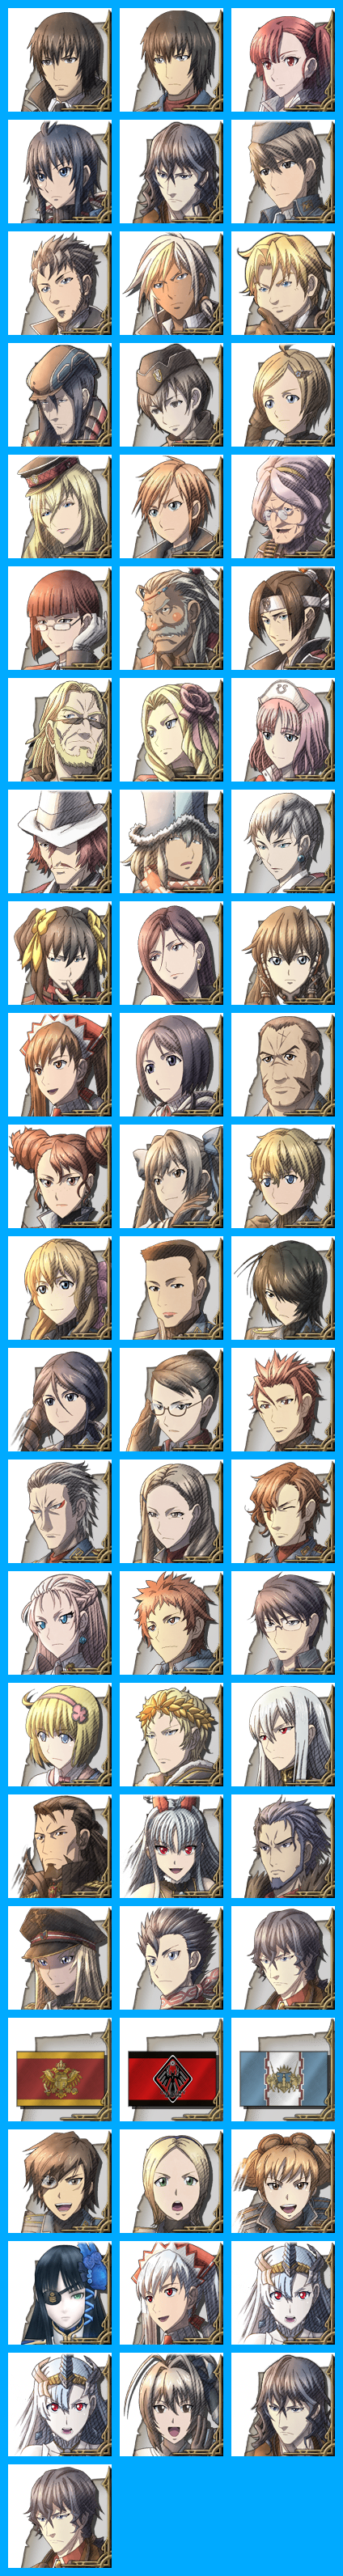 Valkyria Chronicles 3: Unrecorded Chronicles - Battle Faces (Large)